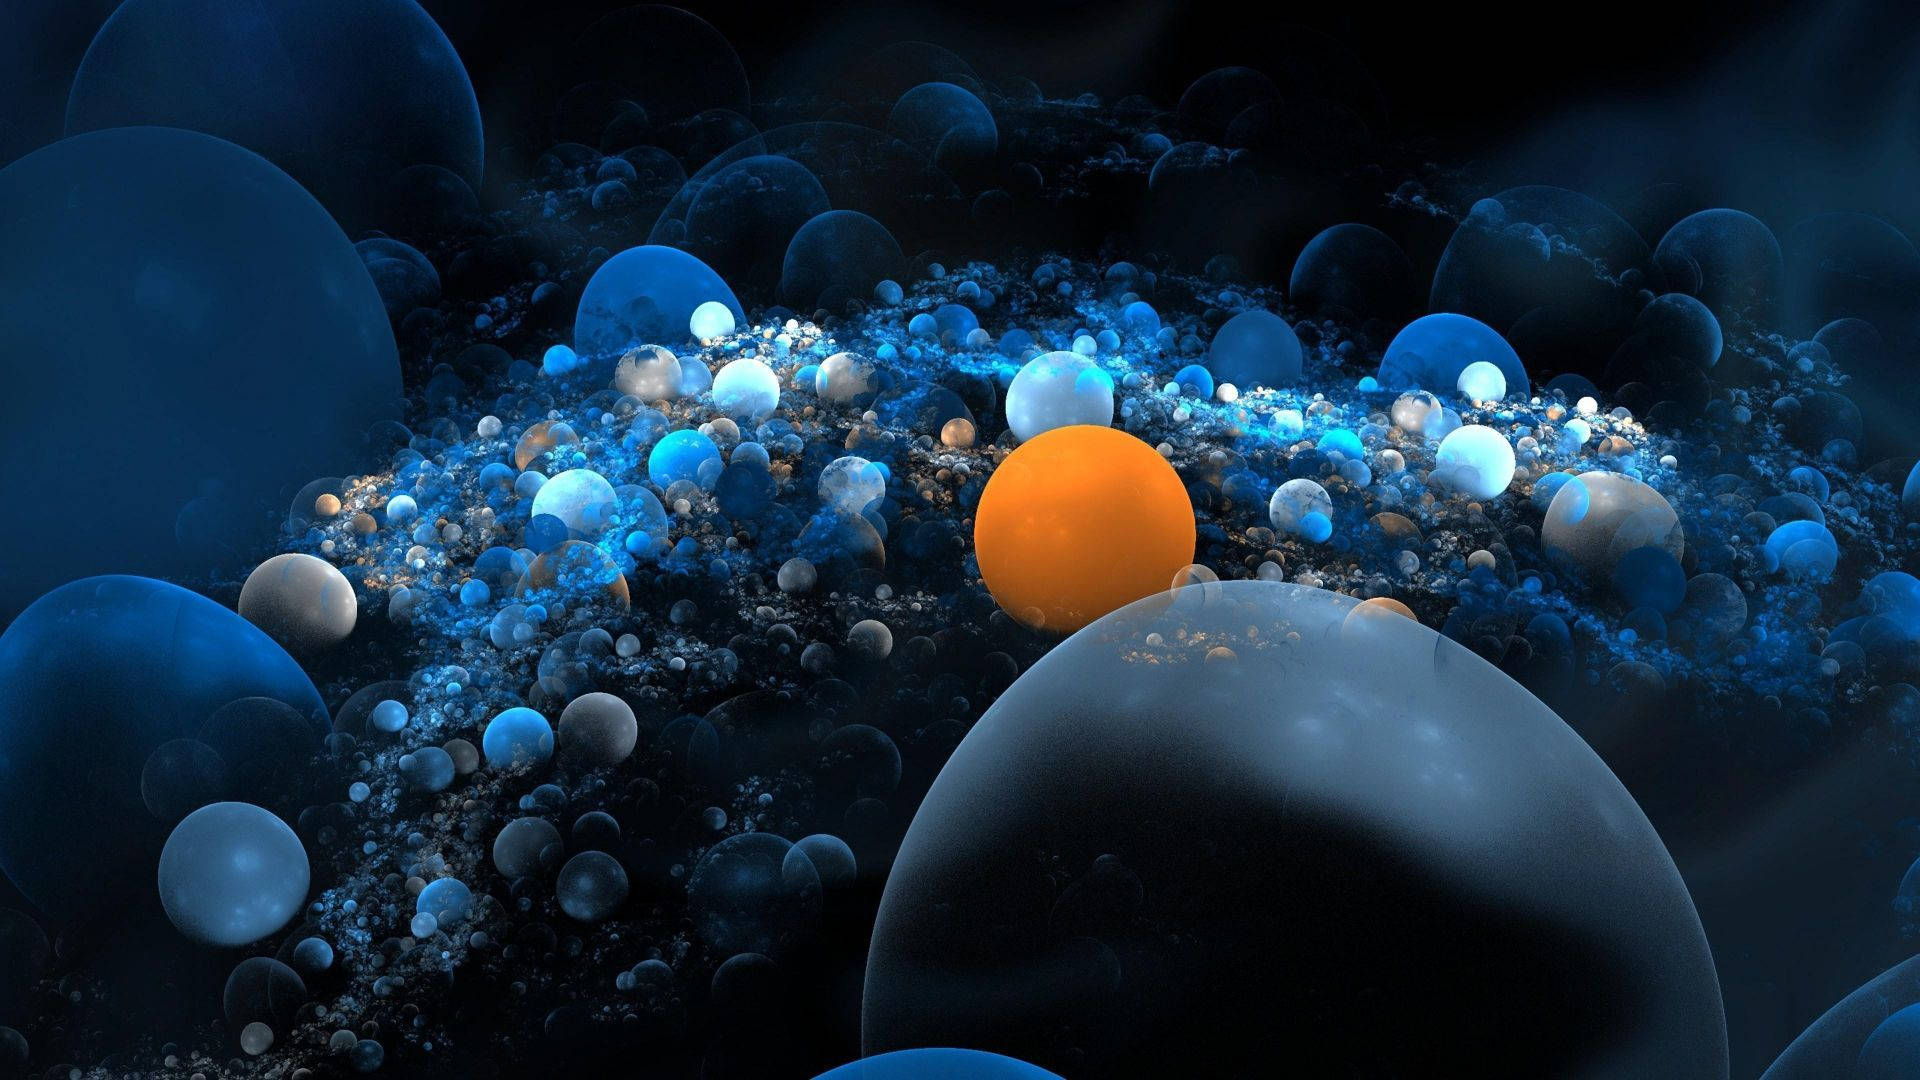 Cool Orange Circle And Blue Spheres Background